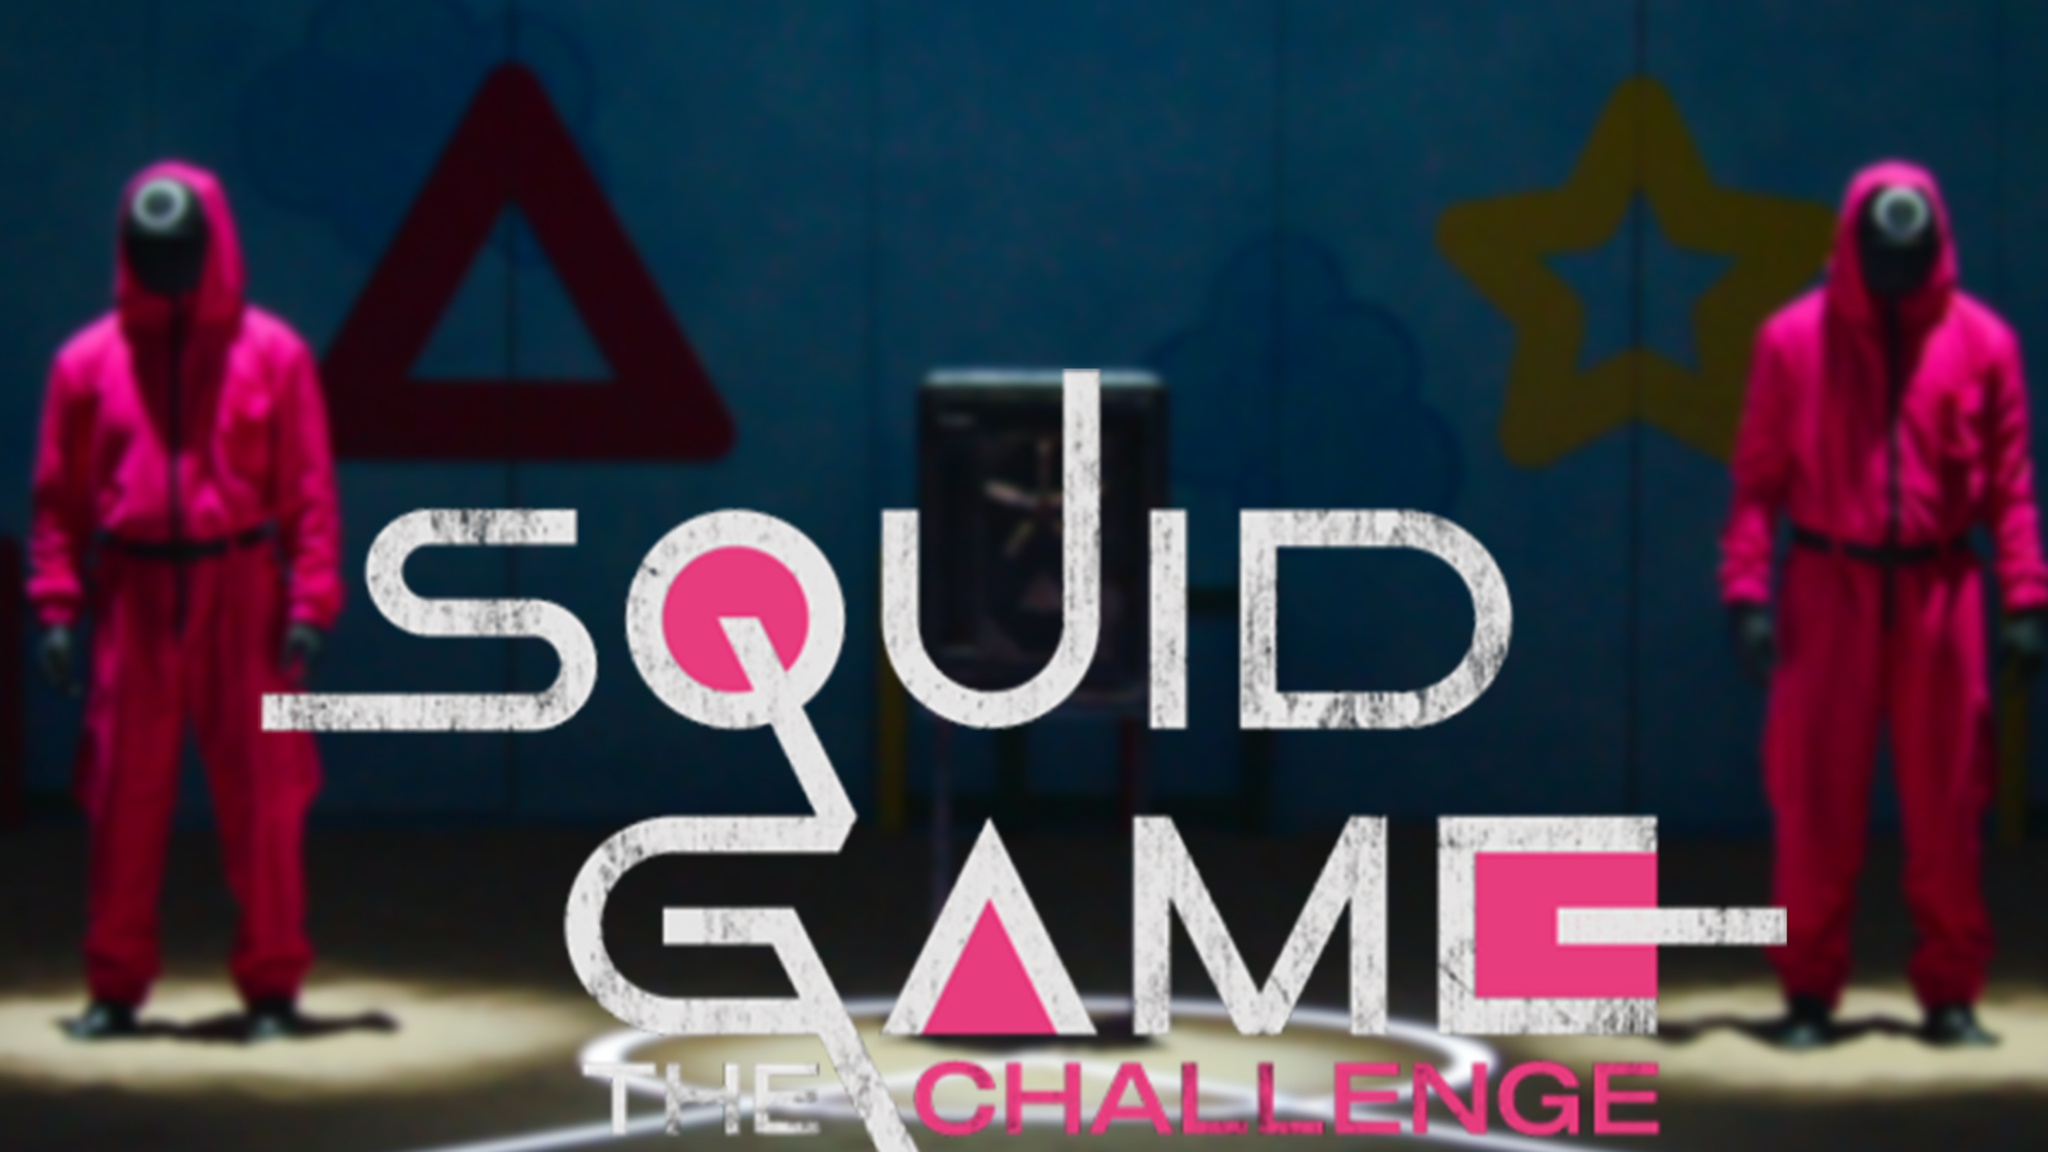 Squid Game predictions: Who will win The Challenge? - Dexerto